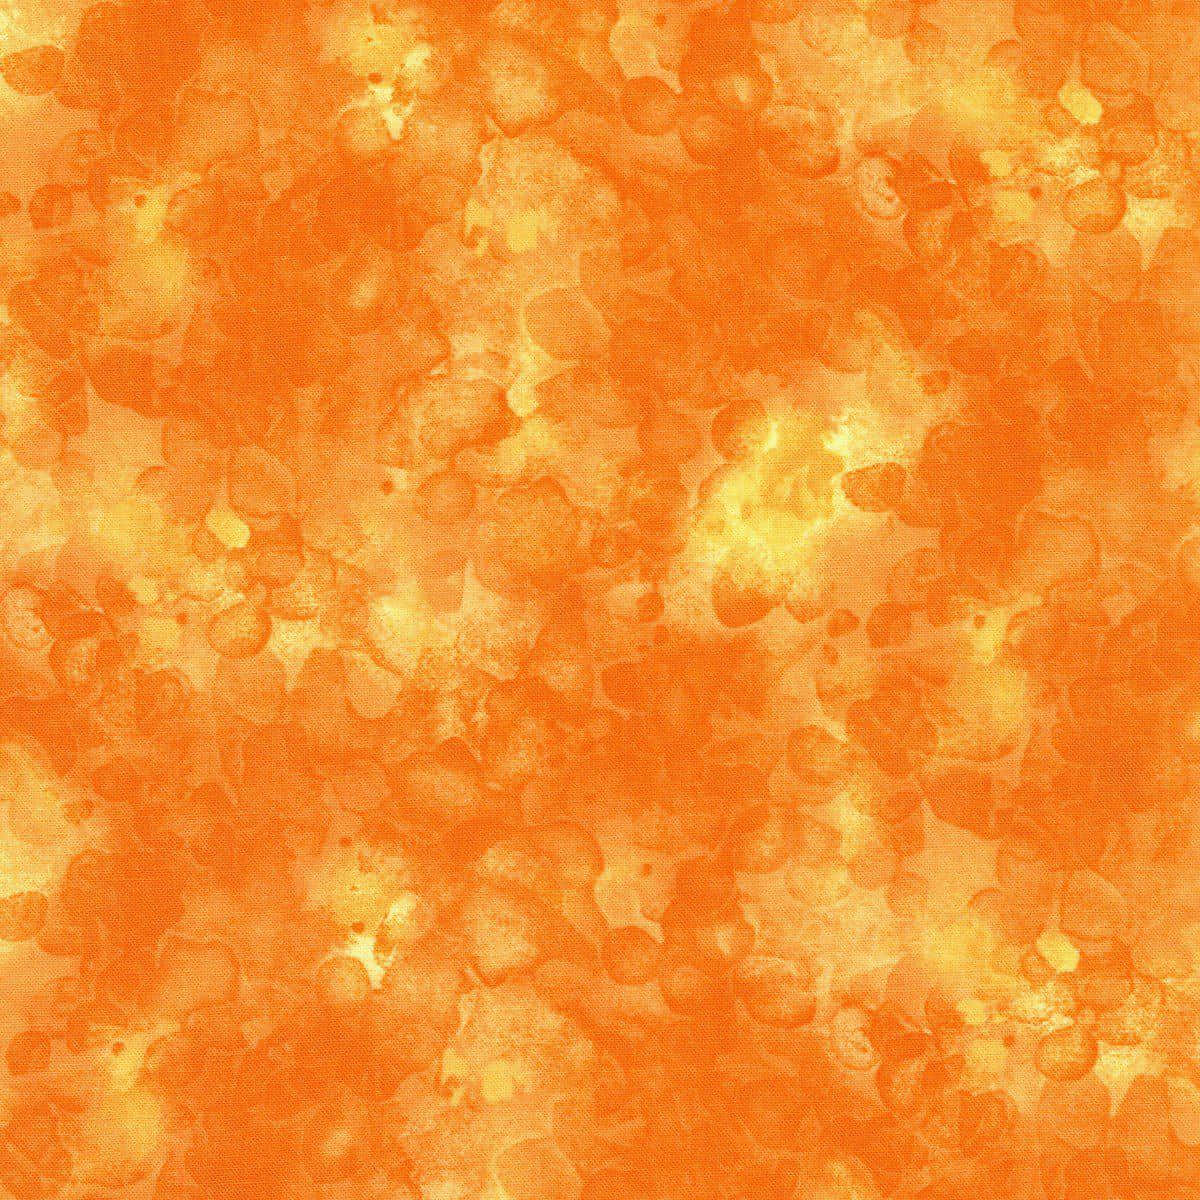 A Bright Orange Background With A Lot Of Dots